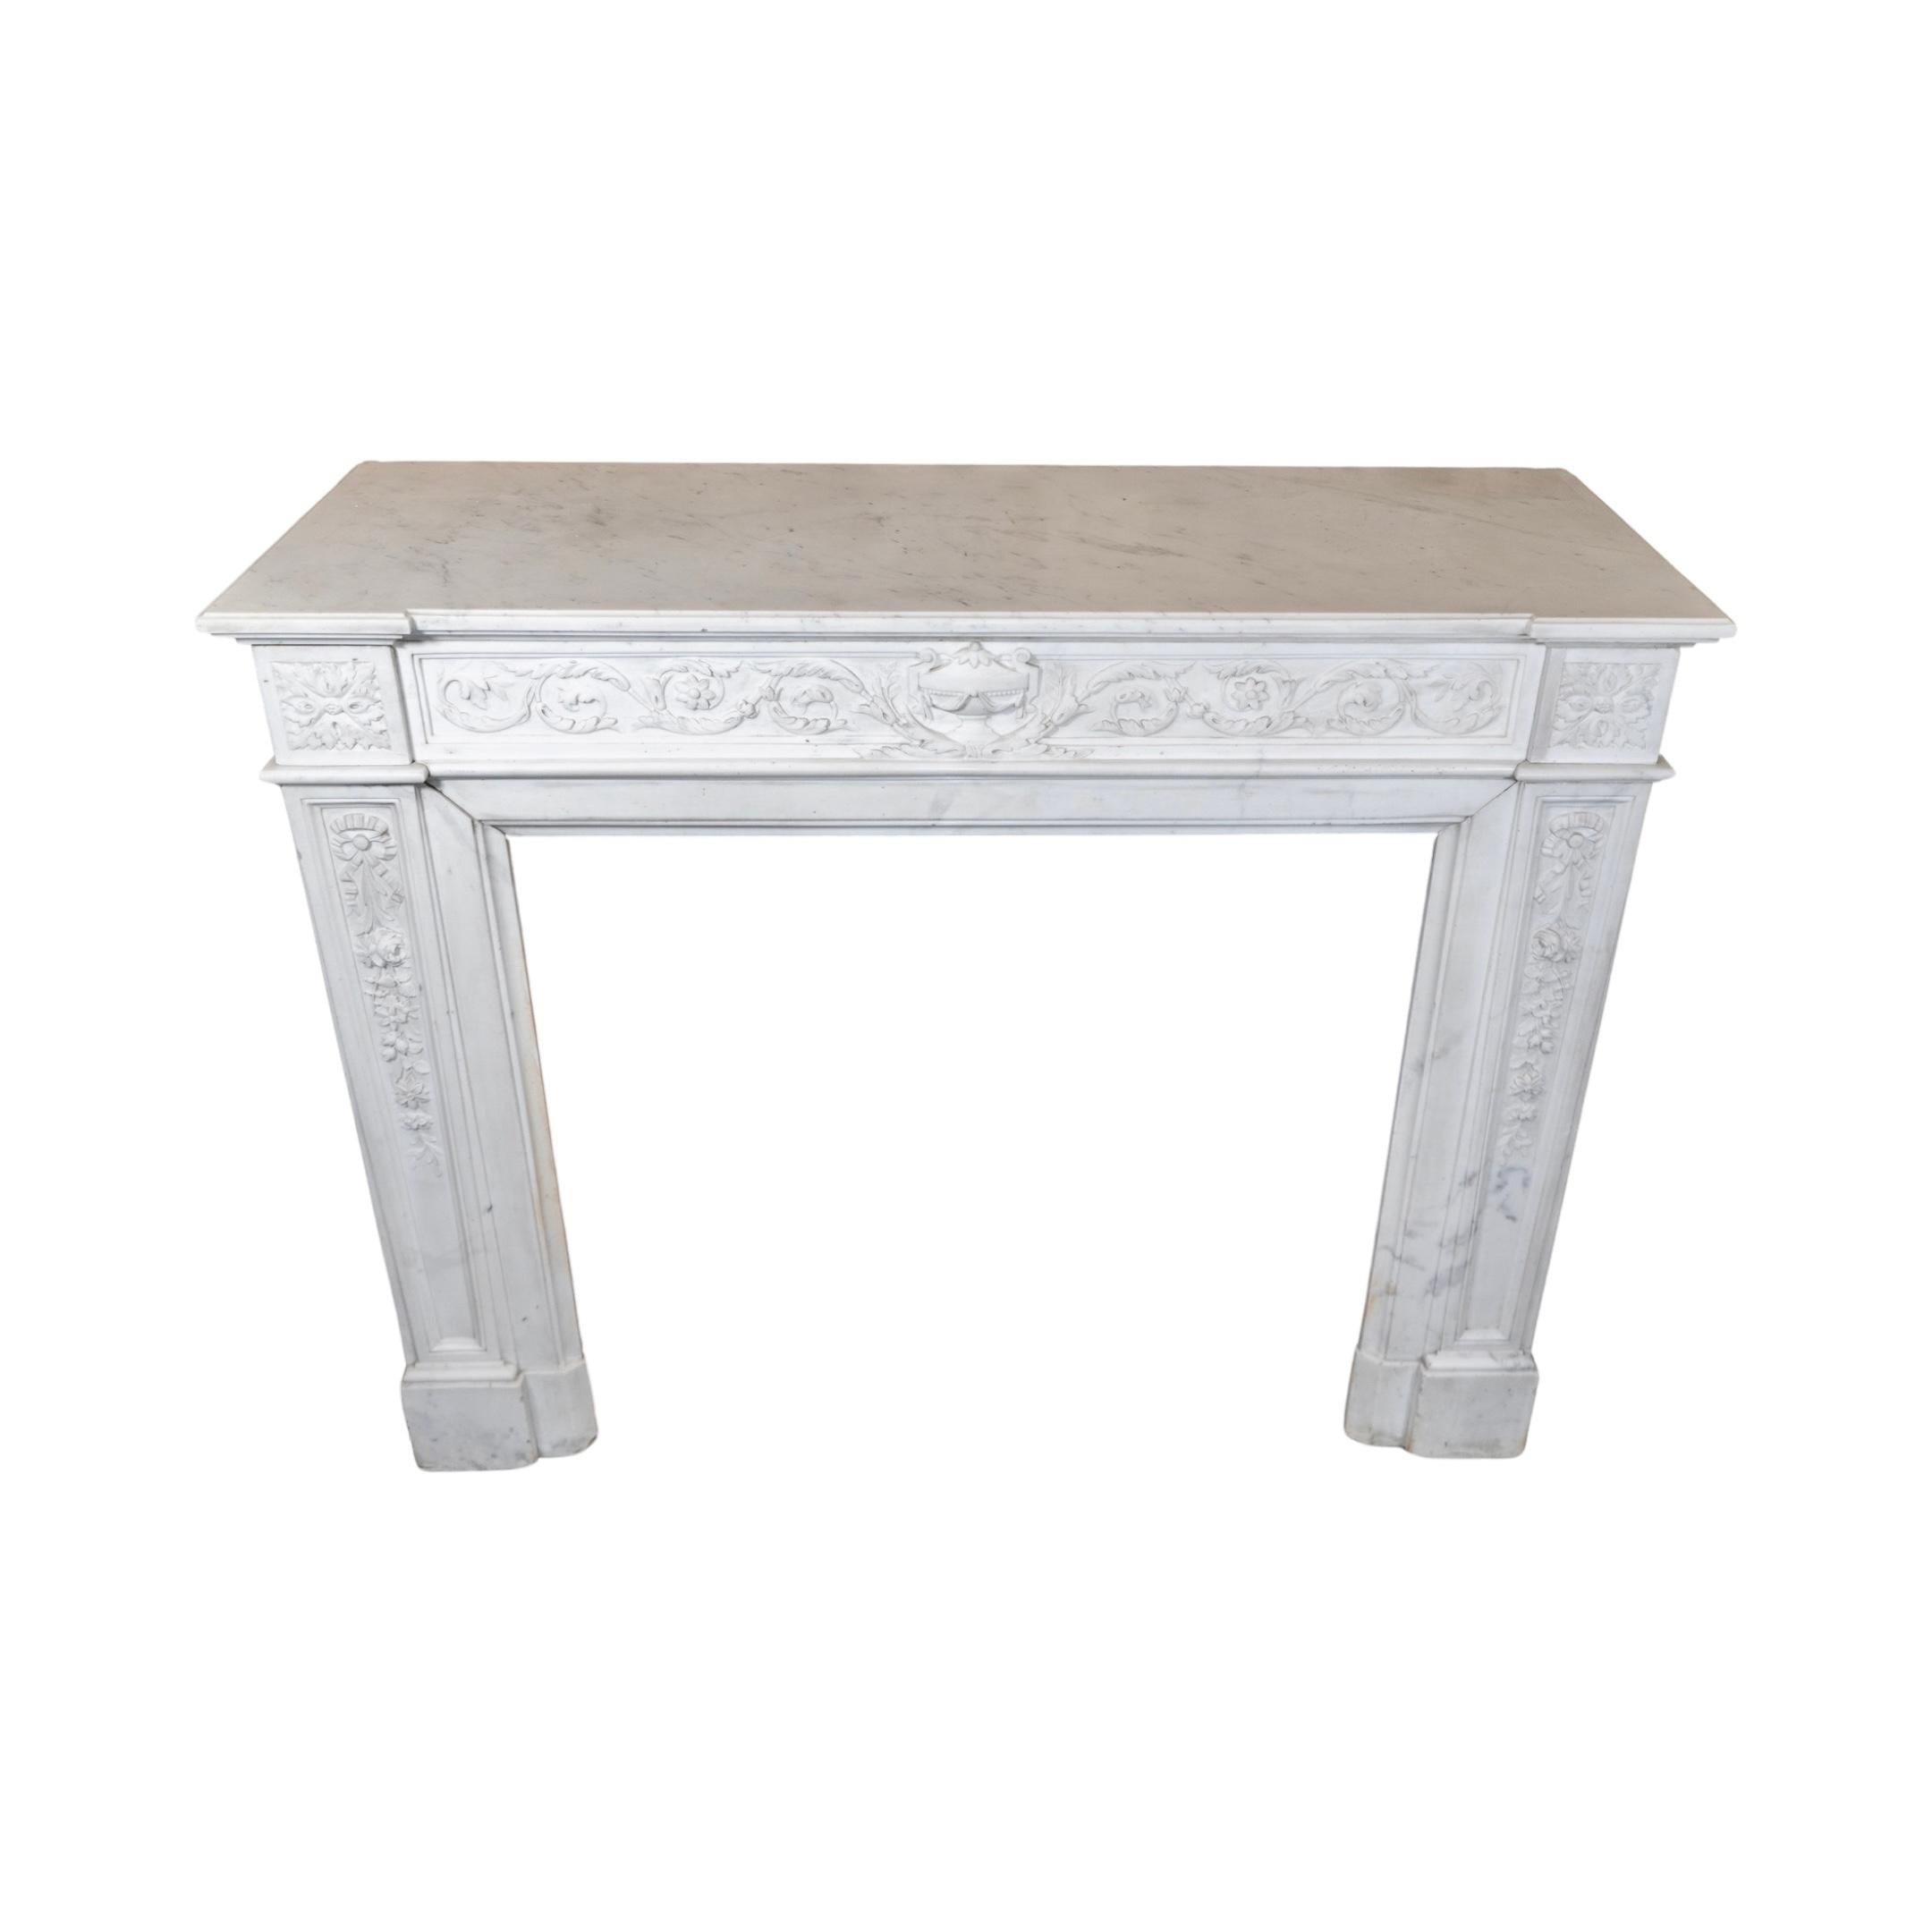 Crafted in France in 1860, this Carrara Marble Mantel exudes elegance and sophistication with its white veined marble and intricate floral motifs. The center features a stunning ventral urn vase, making it a beautiful addition to any home. Elevate